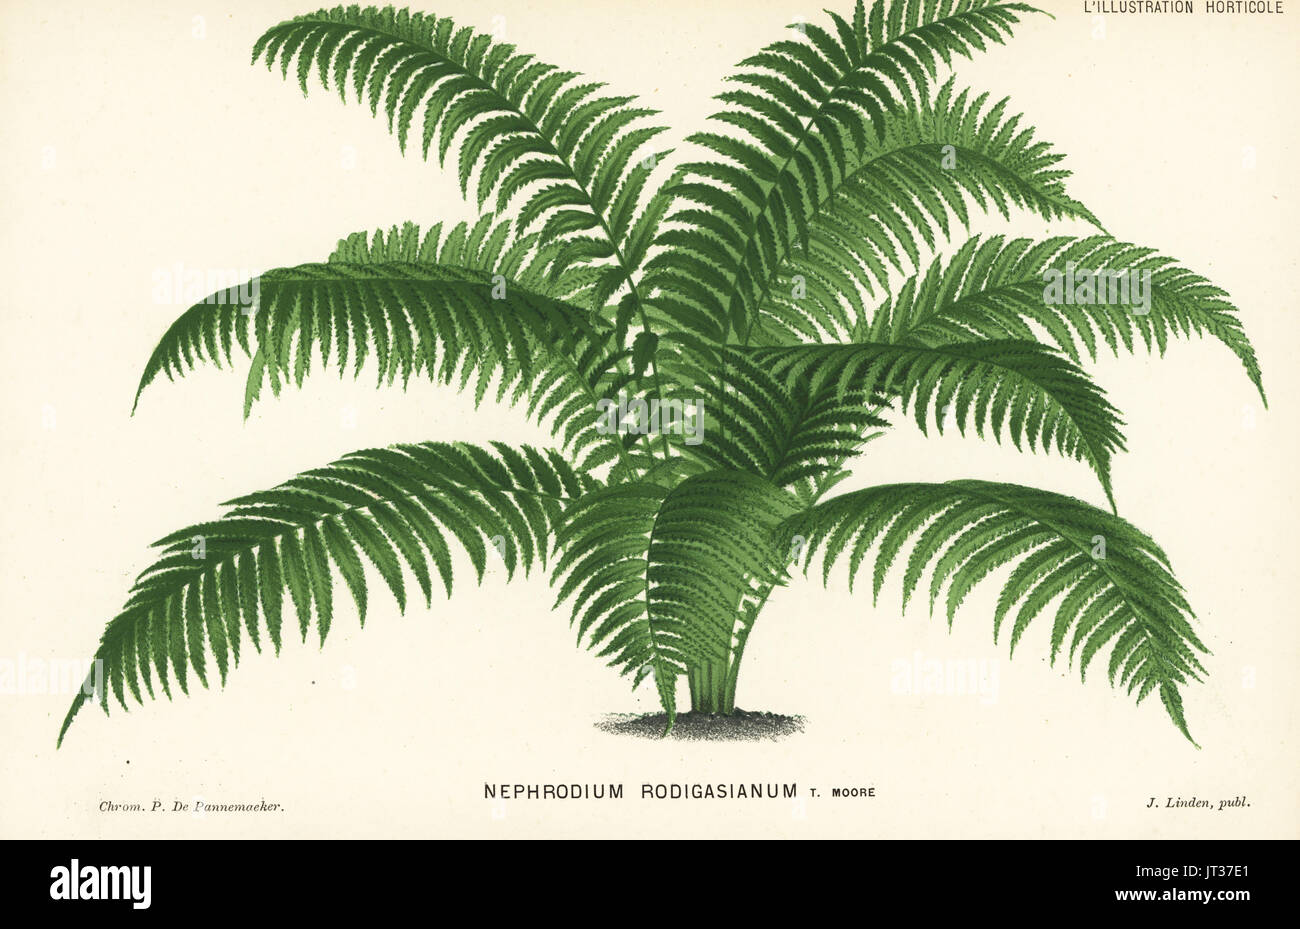 Unresolved fern species, Nephrodium rodigasianum. Chromolithograph by P. de Pannemaeker from Jean Linden's l'Illustration Horticole, Brussels, 1882. Stock Photo